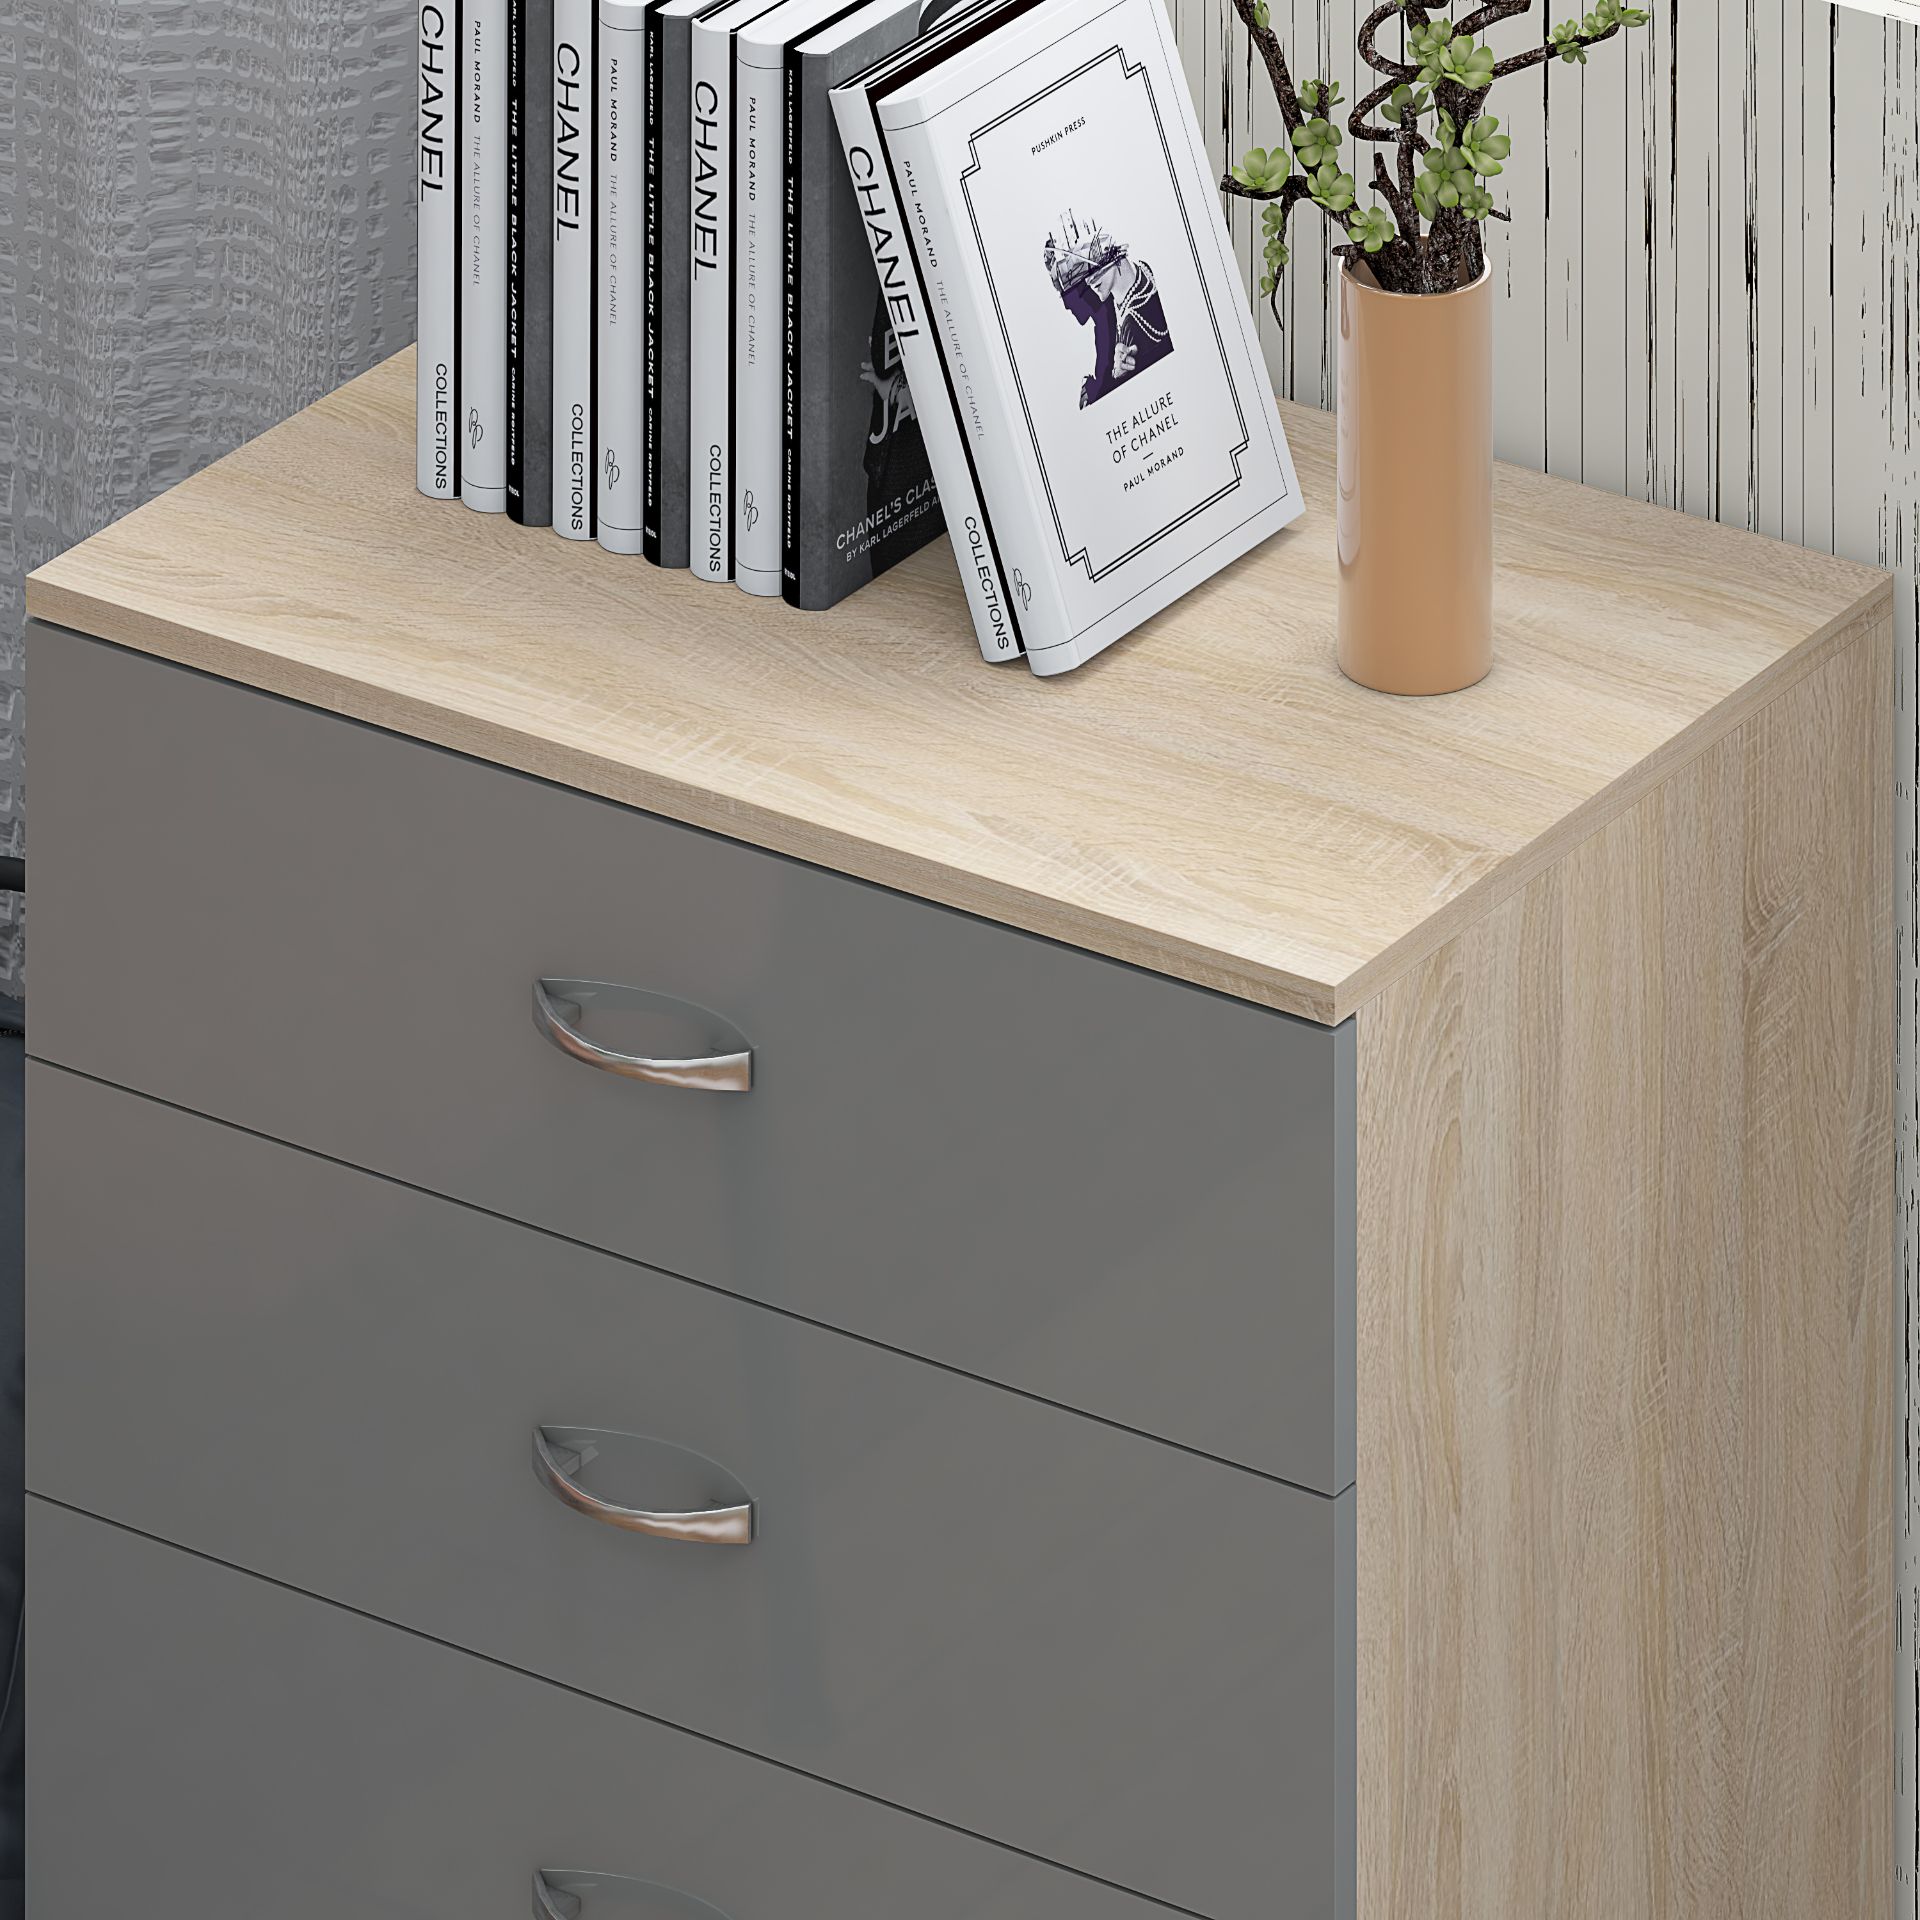 STUNNING CHEST OF DRAWERS X 2 - HIGH GLOSS GREY ON SONOMA OAK FRAME - Image 6 of 9